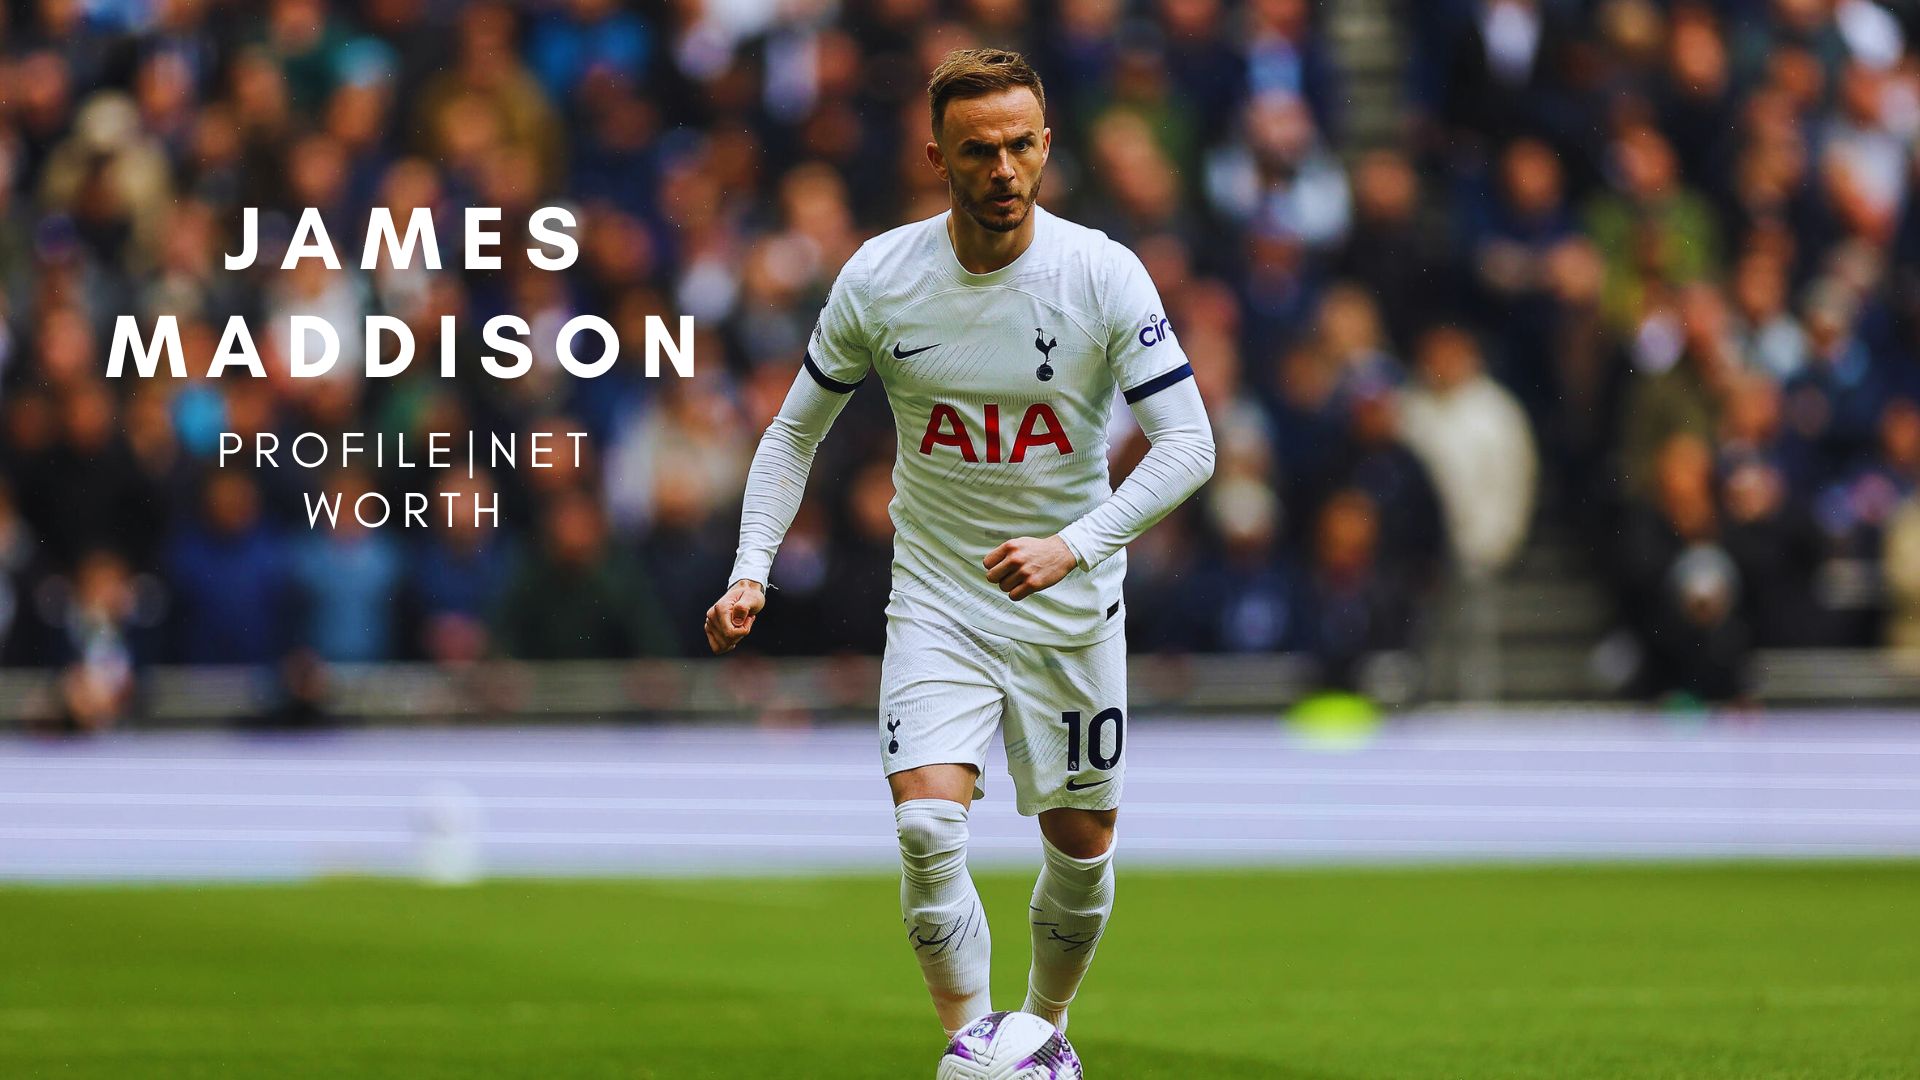 James Maddison Profile – Net Worth, Background, Early Life, Family, Club, and International Career